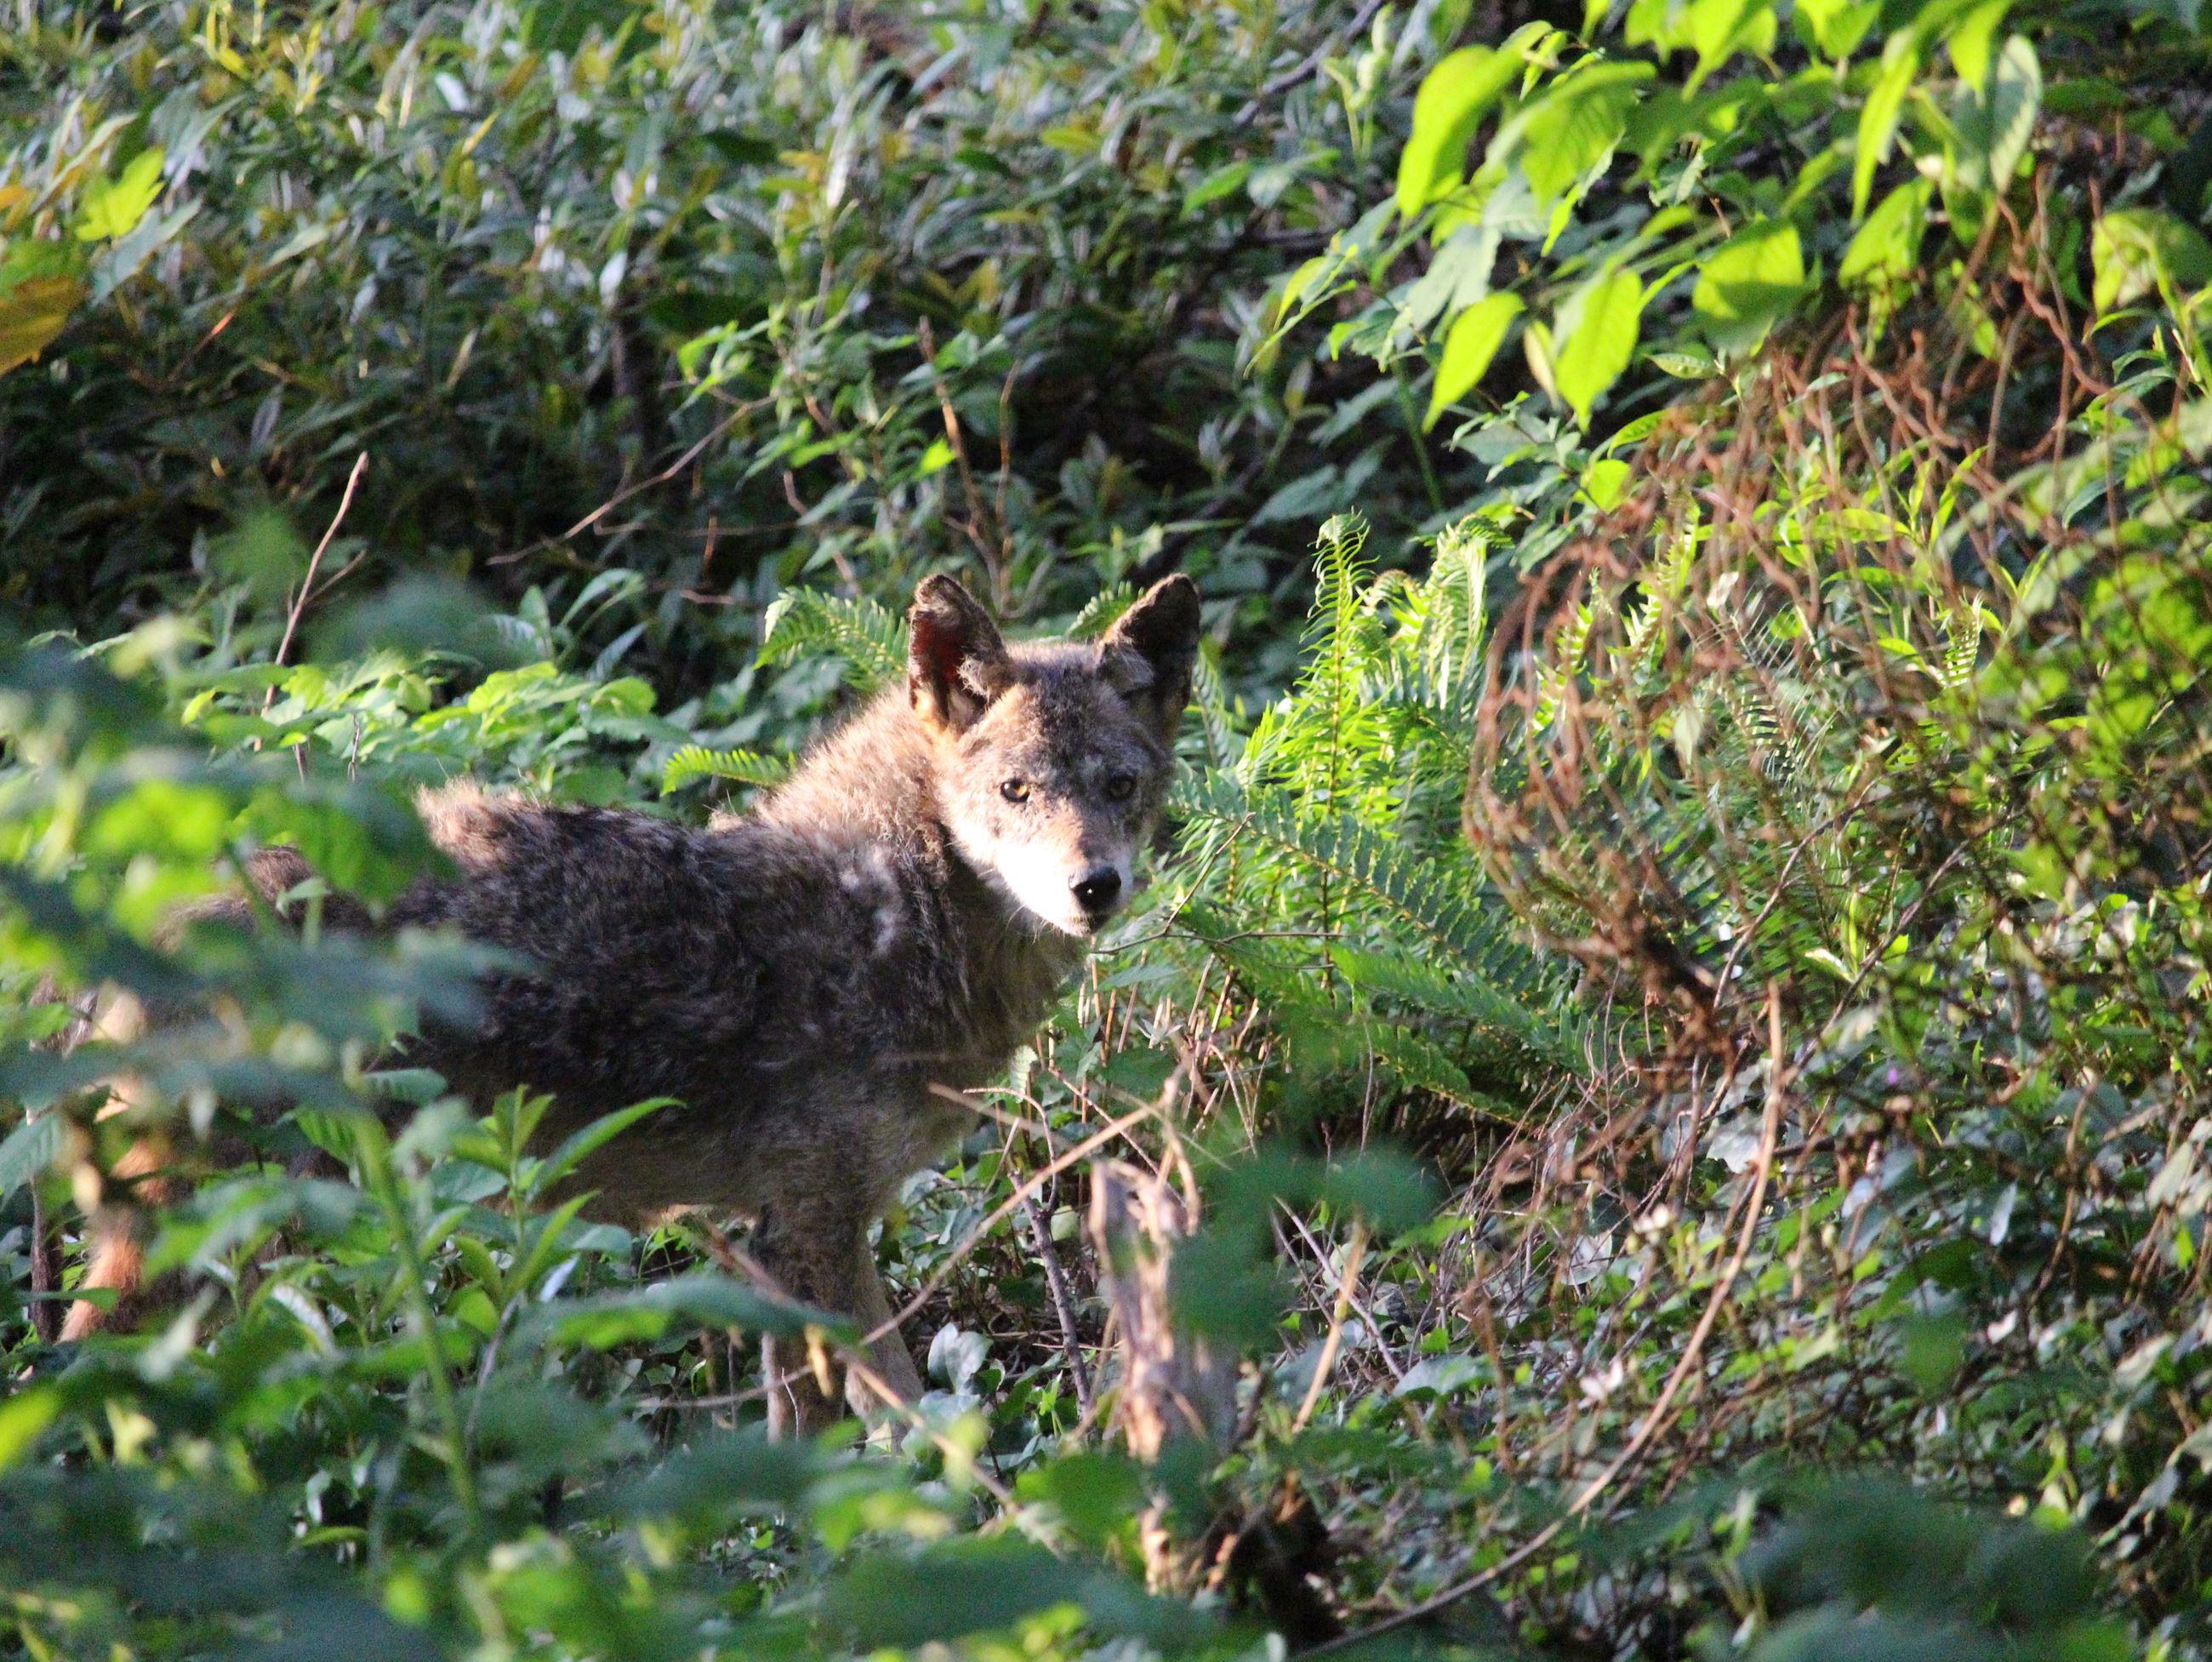 Coyote in the Bush - News Flash Image